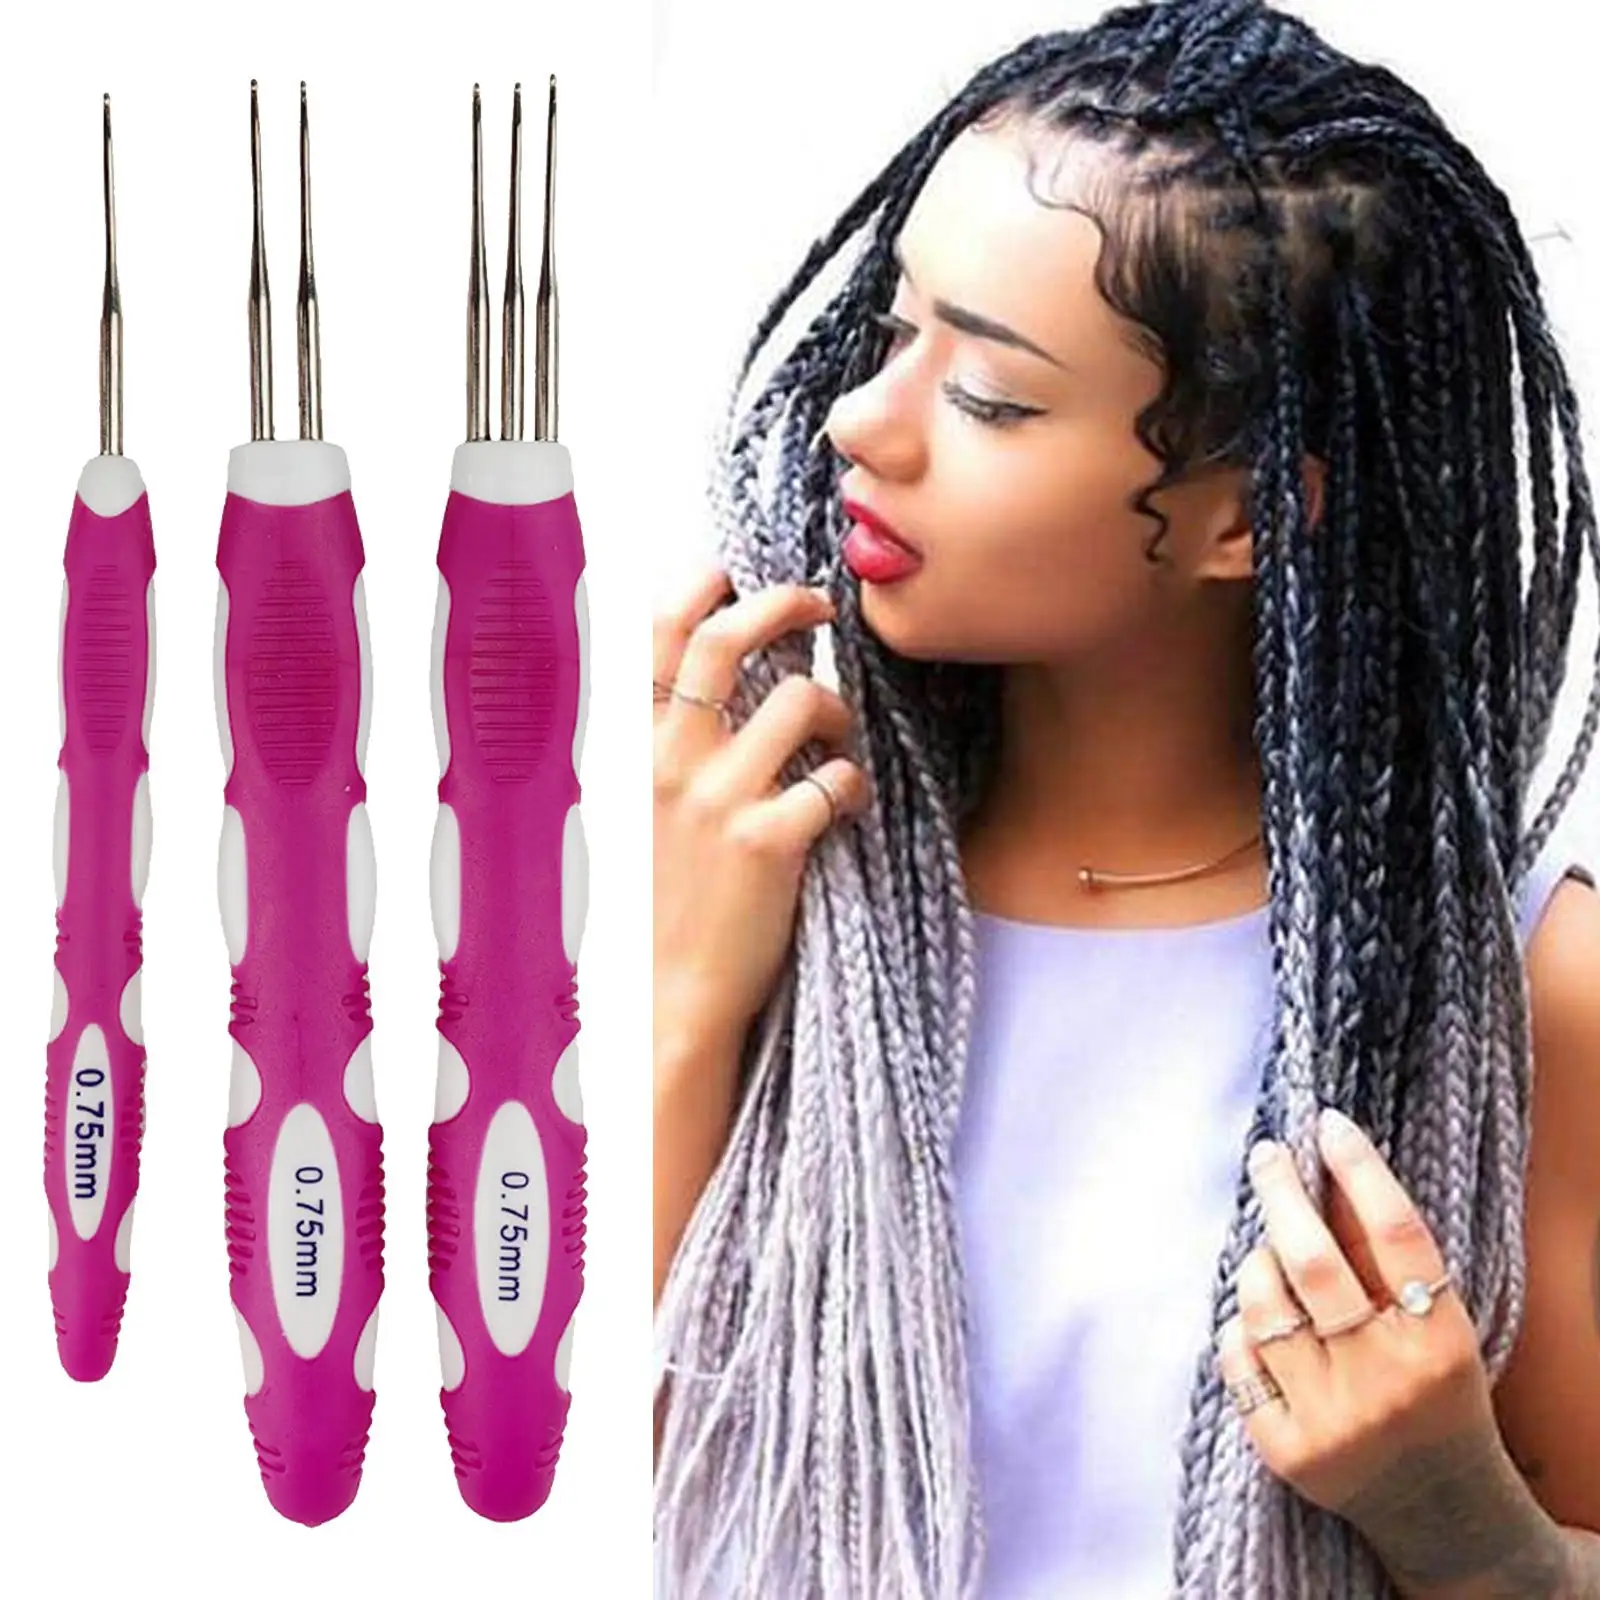 Dreadlock Crochet Needle Hair Parting Flexible Knitting Crochet DIY Durable with Handle 0.75mm for Hair Accessories Braid Crafts